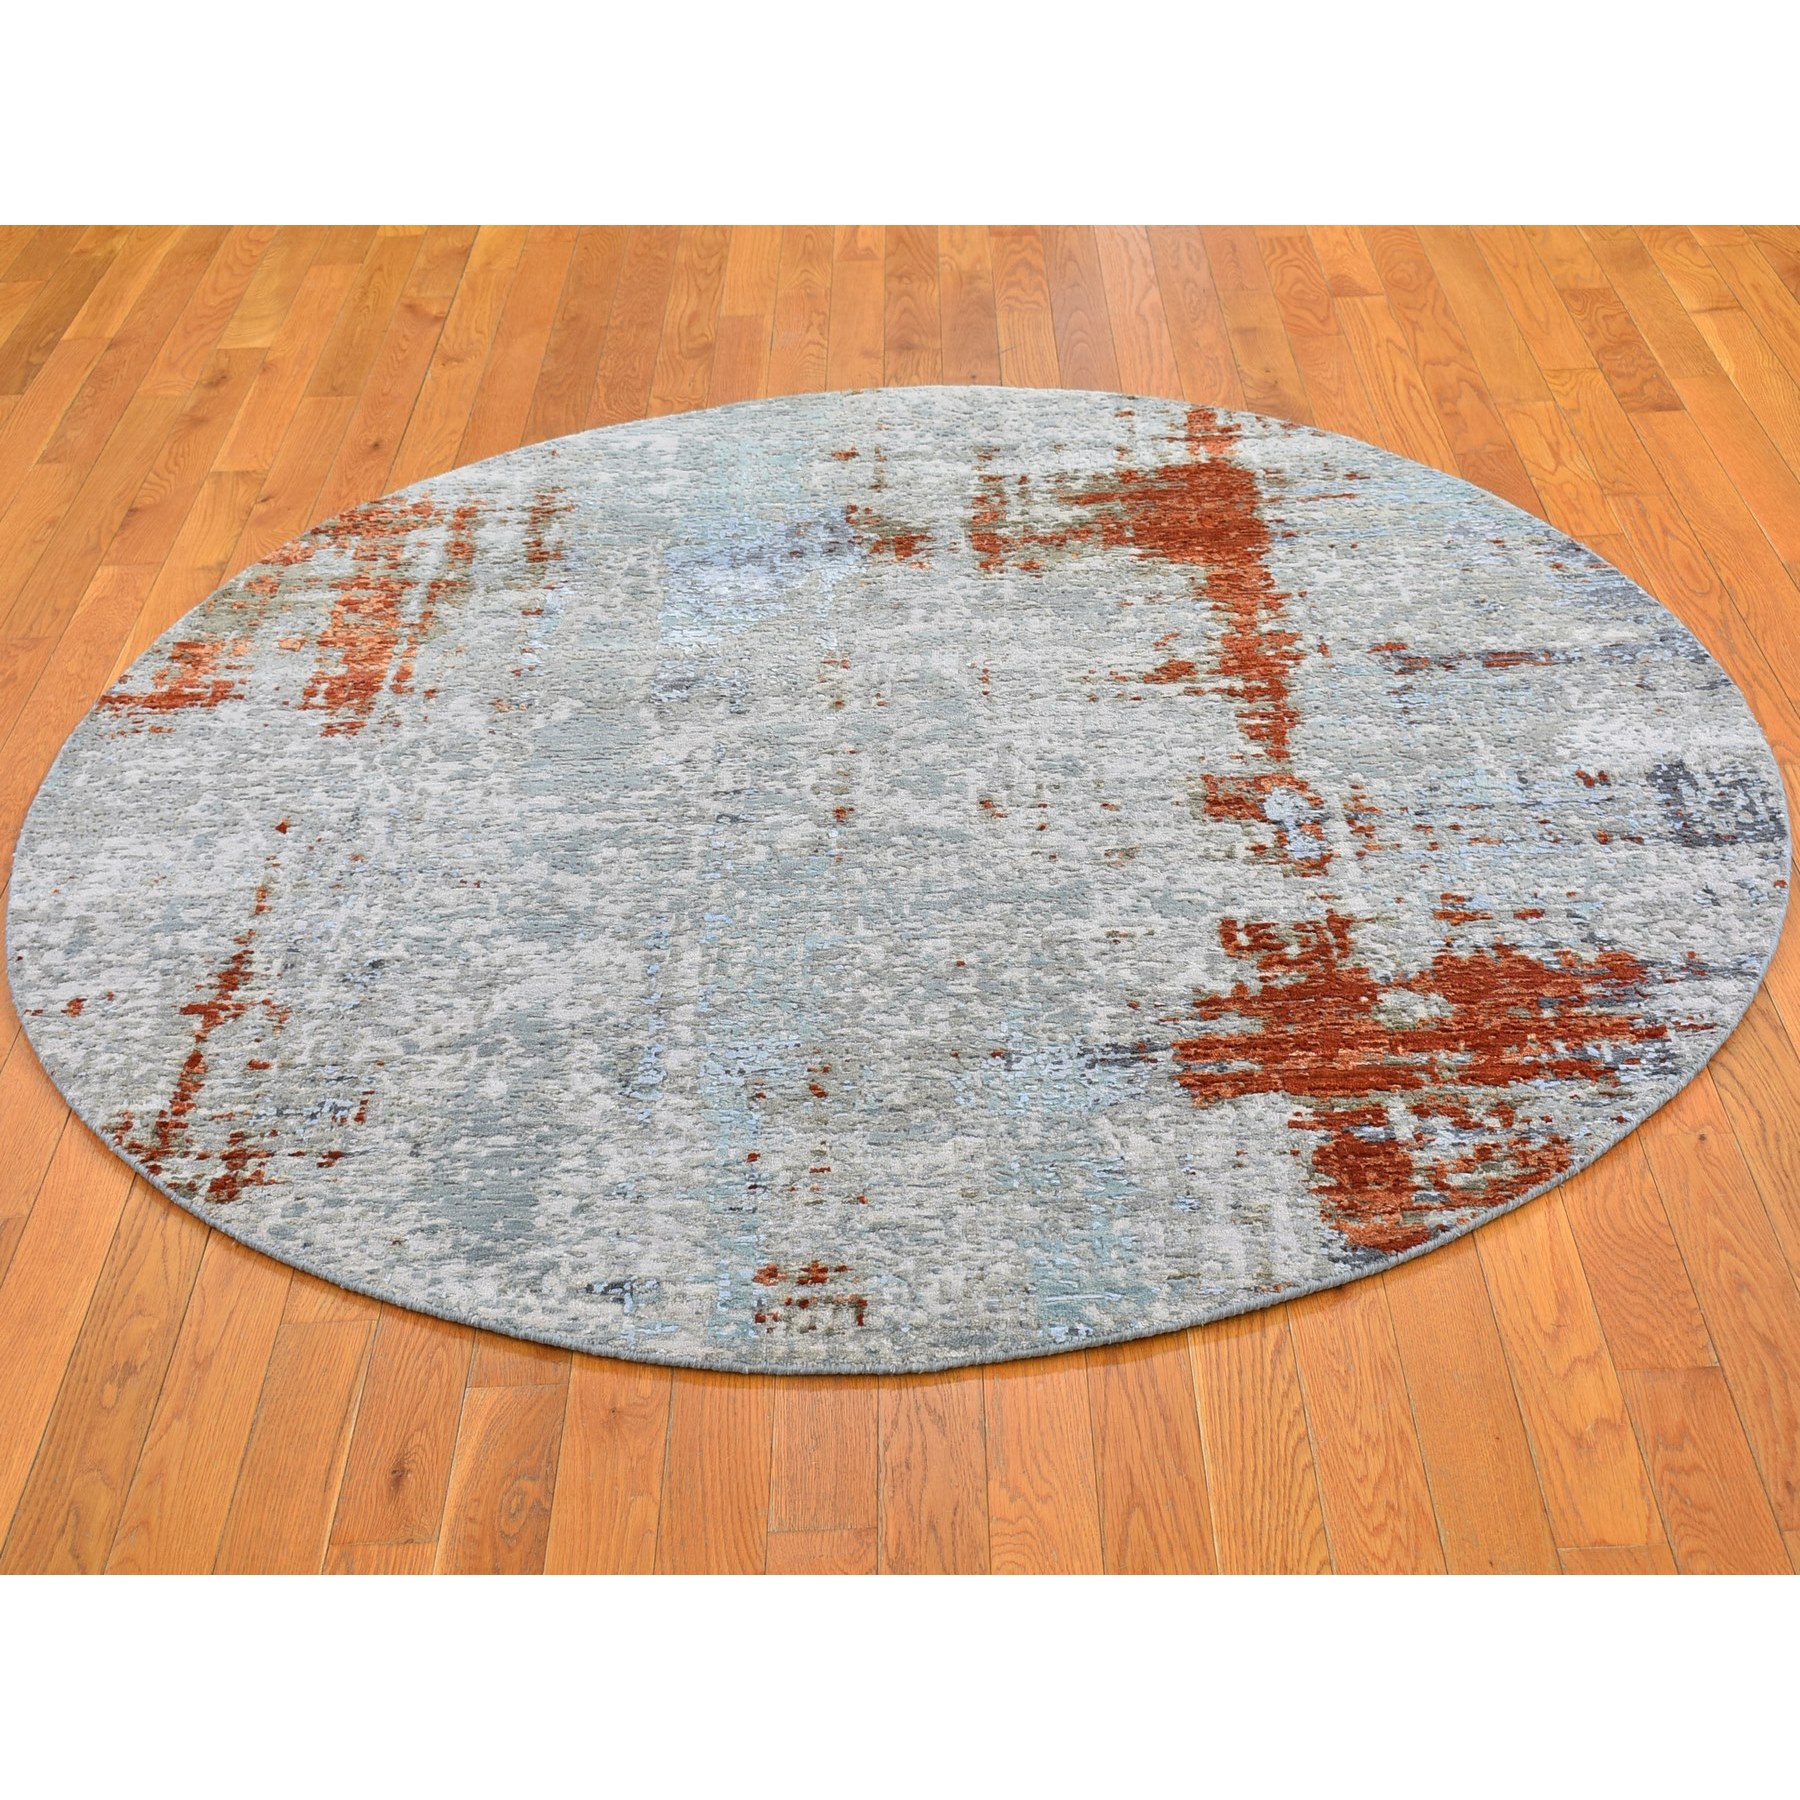 6'1"x6'1" Wool and Silk Persian Knot with Abstract Design Denser Weave Silver Hand Woven Round Oriental Rug 